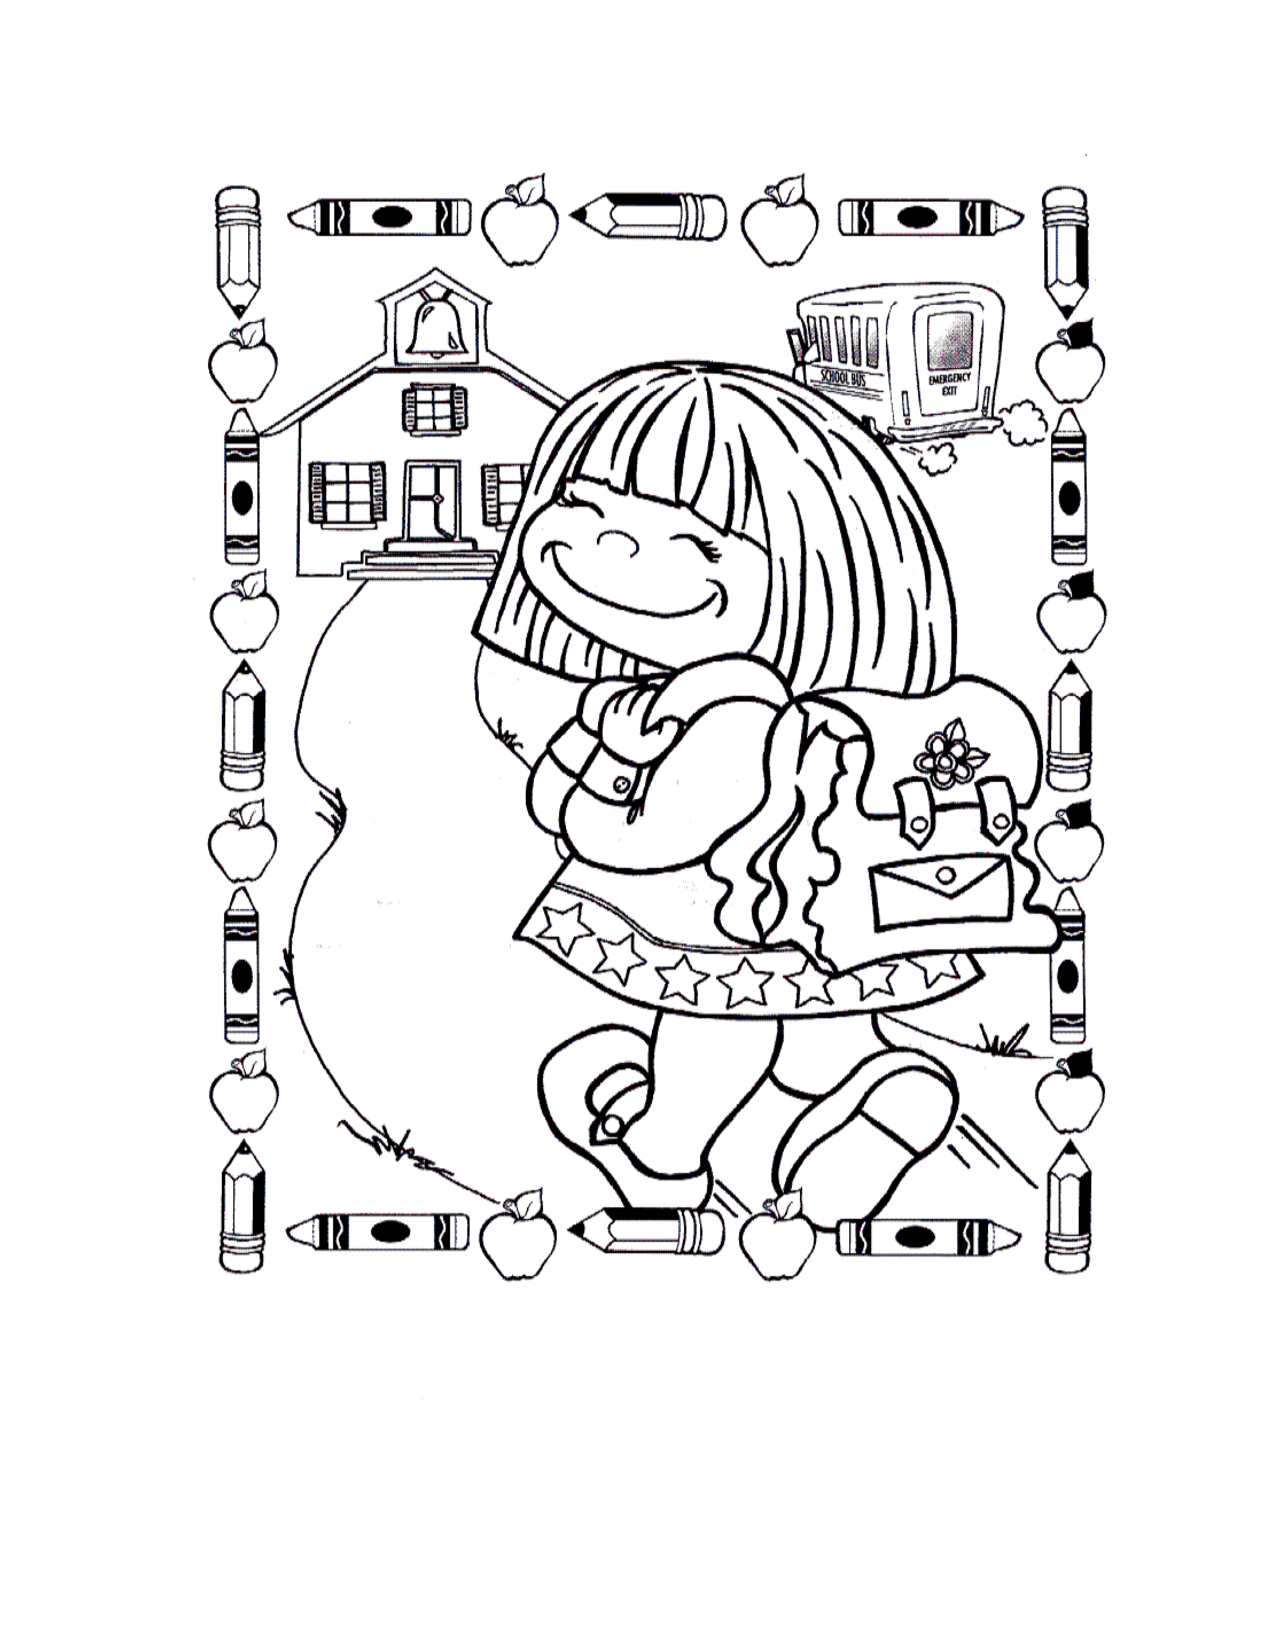 Free Coloring Pages For First Grade - Coloring Home